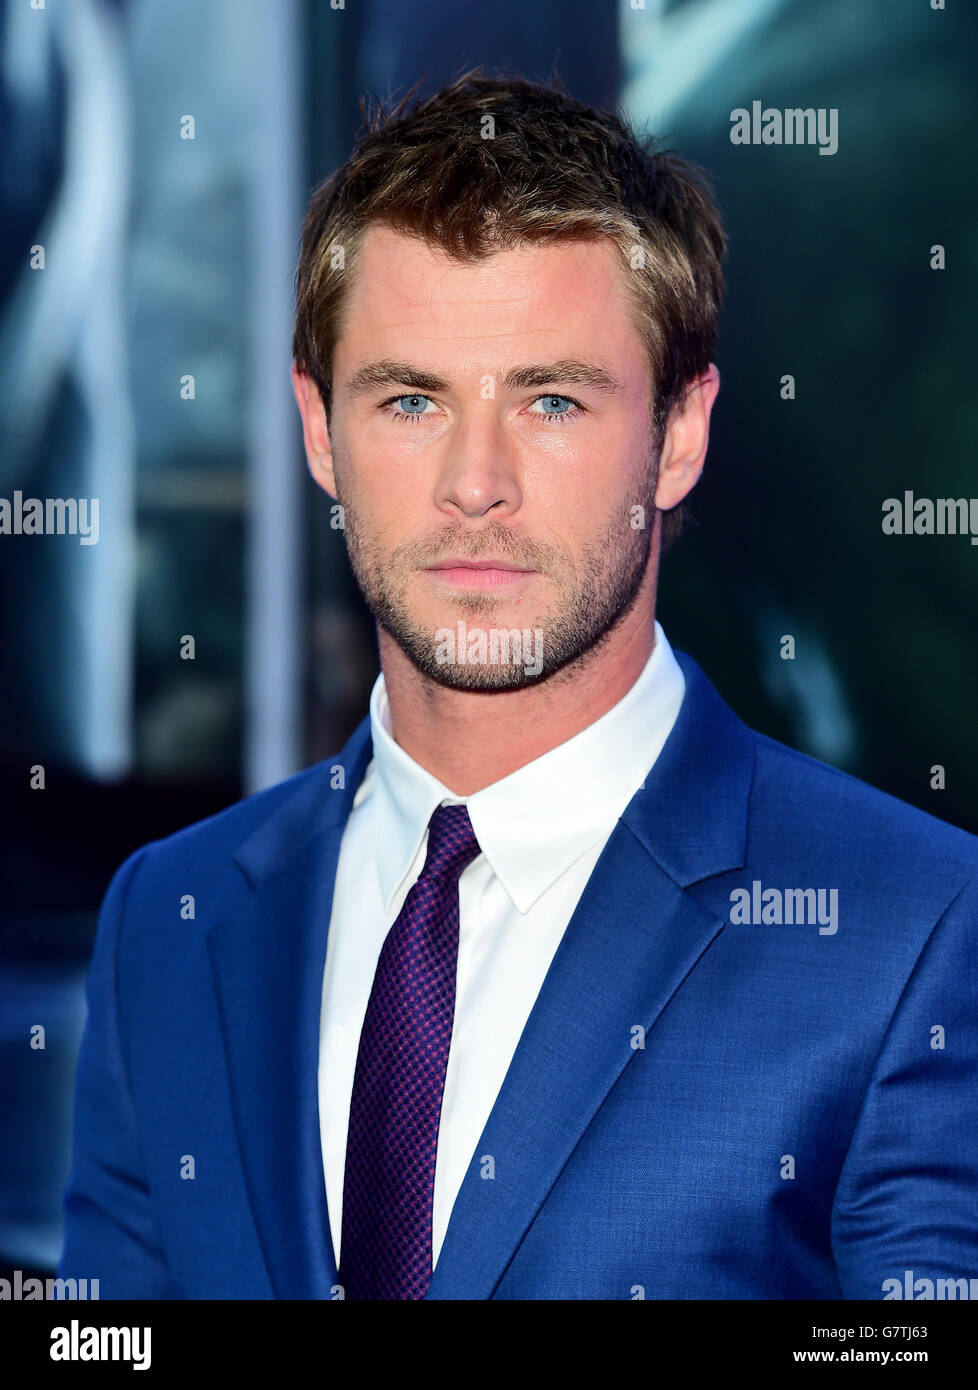 Chris Hemsworth (Thor) attending Marvel Avengers: The Age Of Ultron European Film Premiere held at the VUE cinema in Westfield, London. Stock Photo